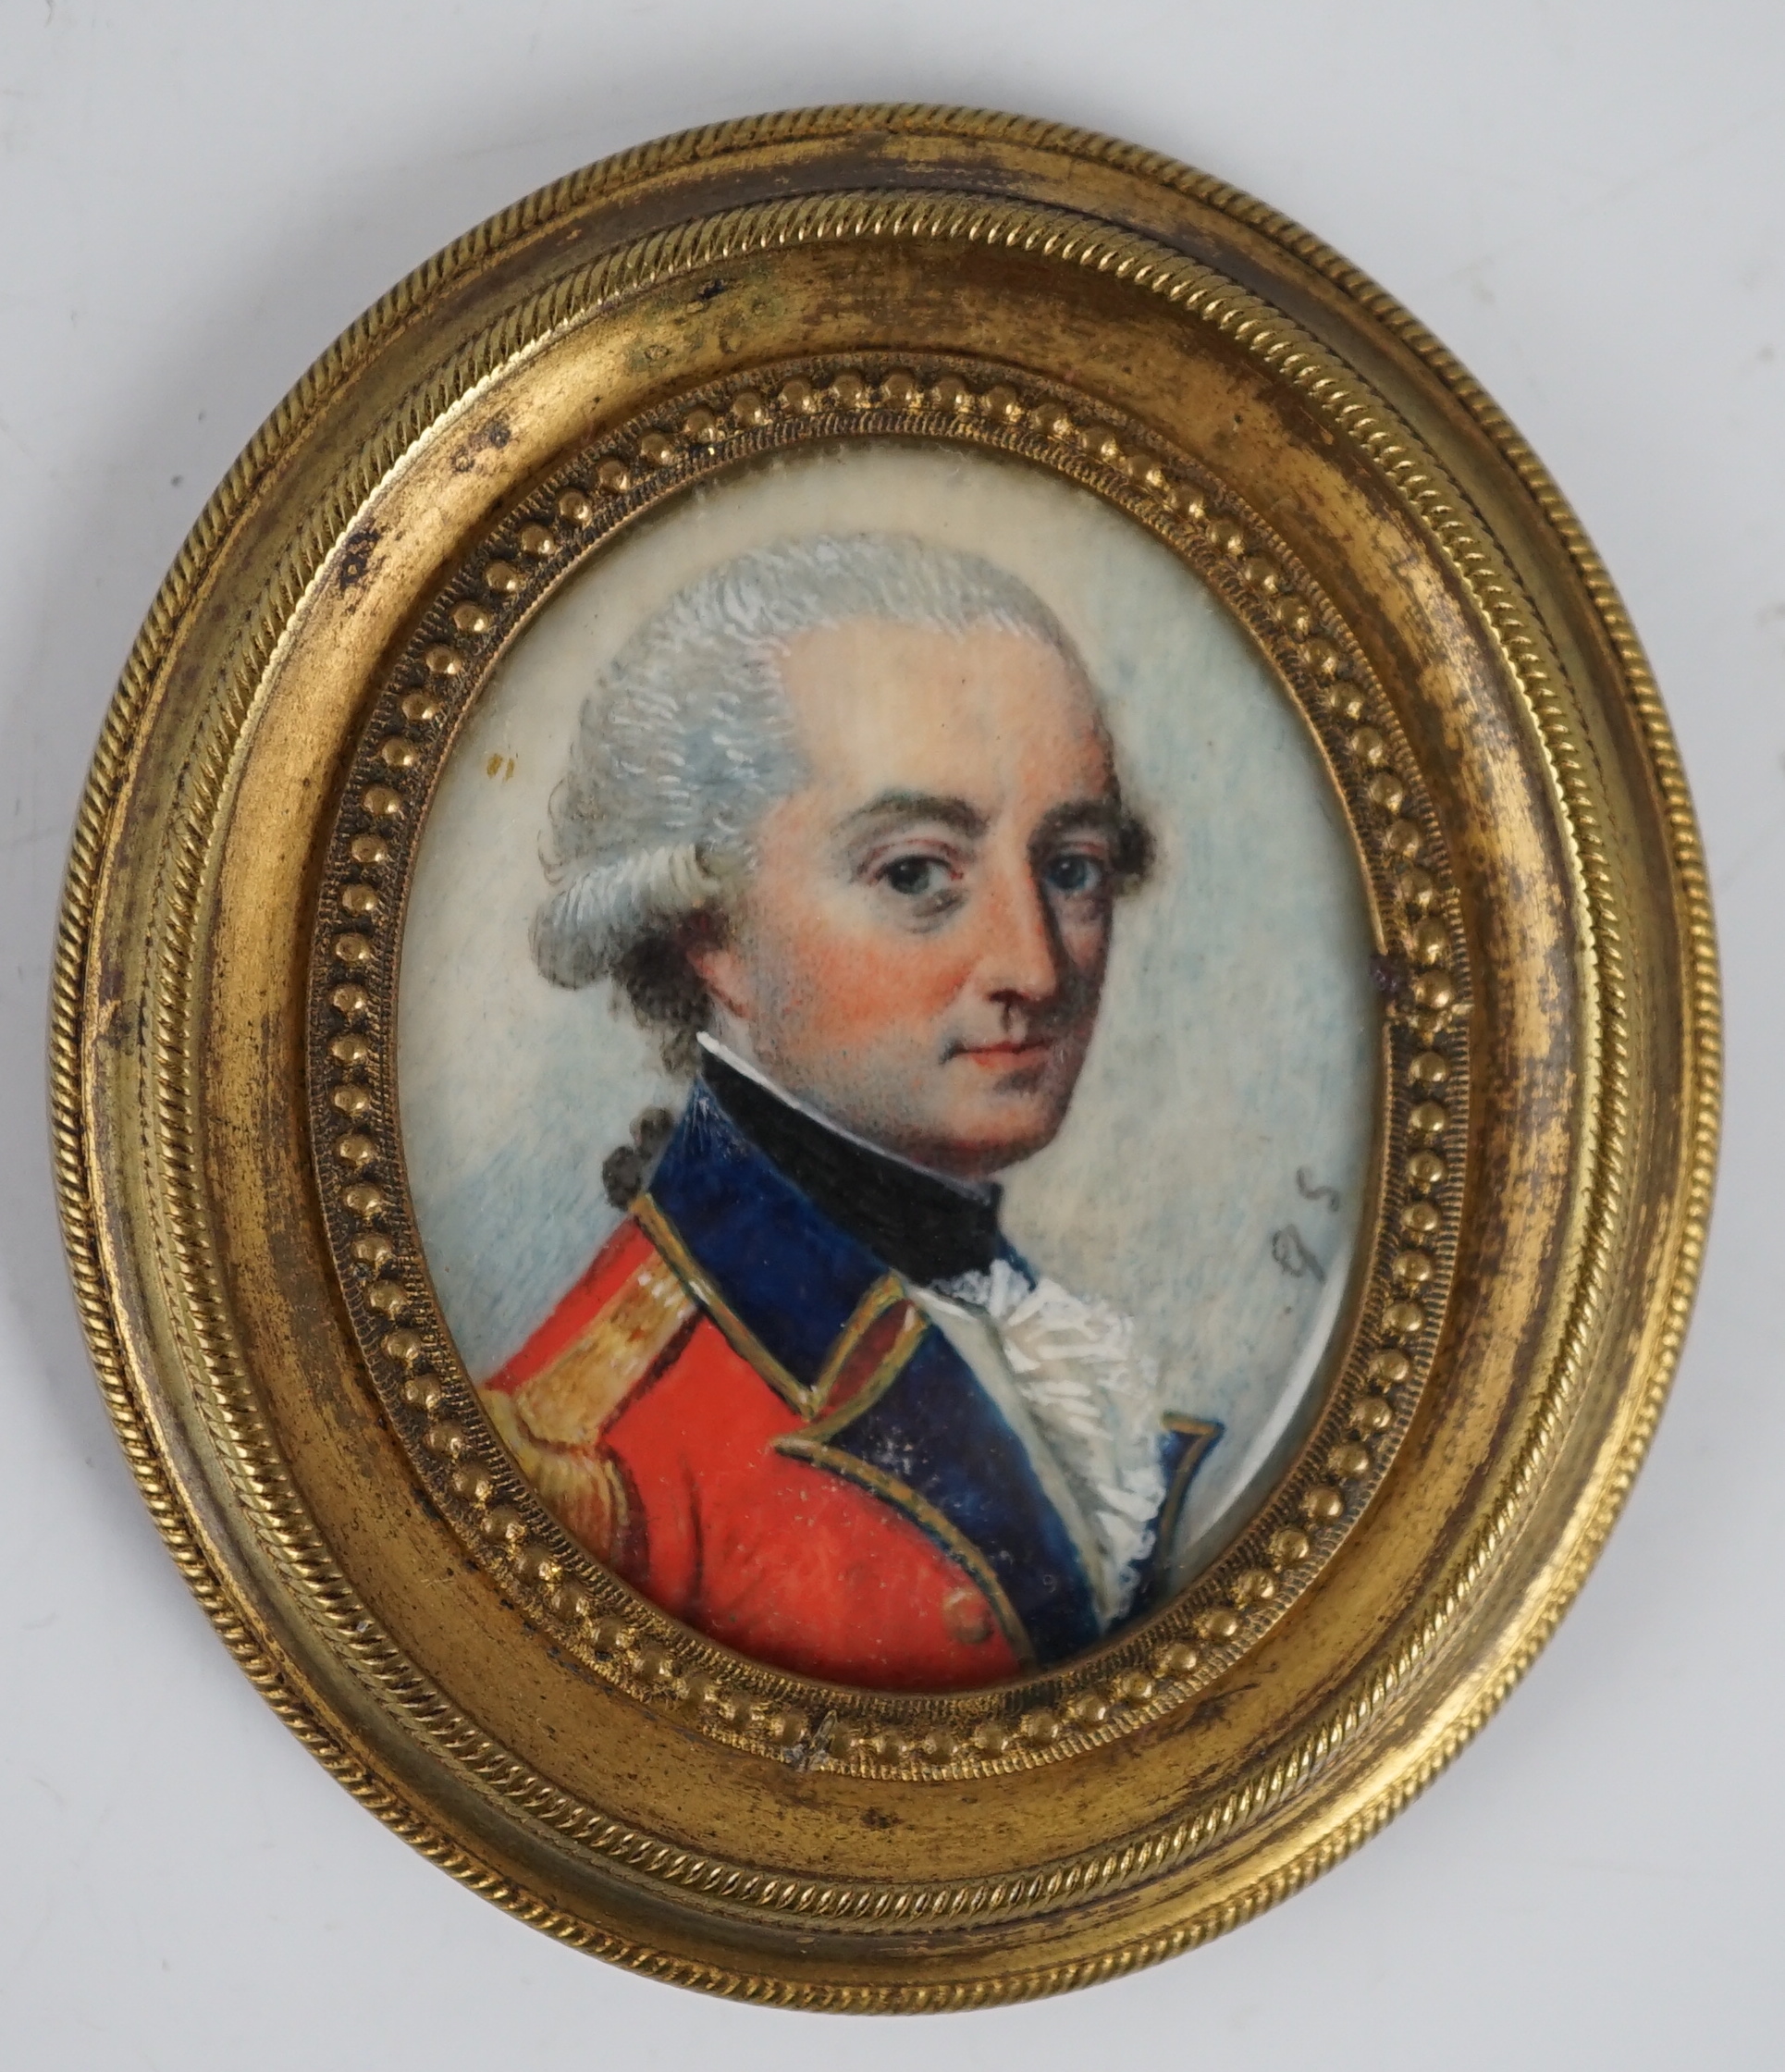 G.S circa 1810, Portrait miniature of an army officer, oil on ivory, 3.8 x 3cm. CITES Submission reference 1FREREYY